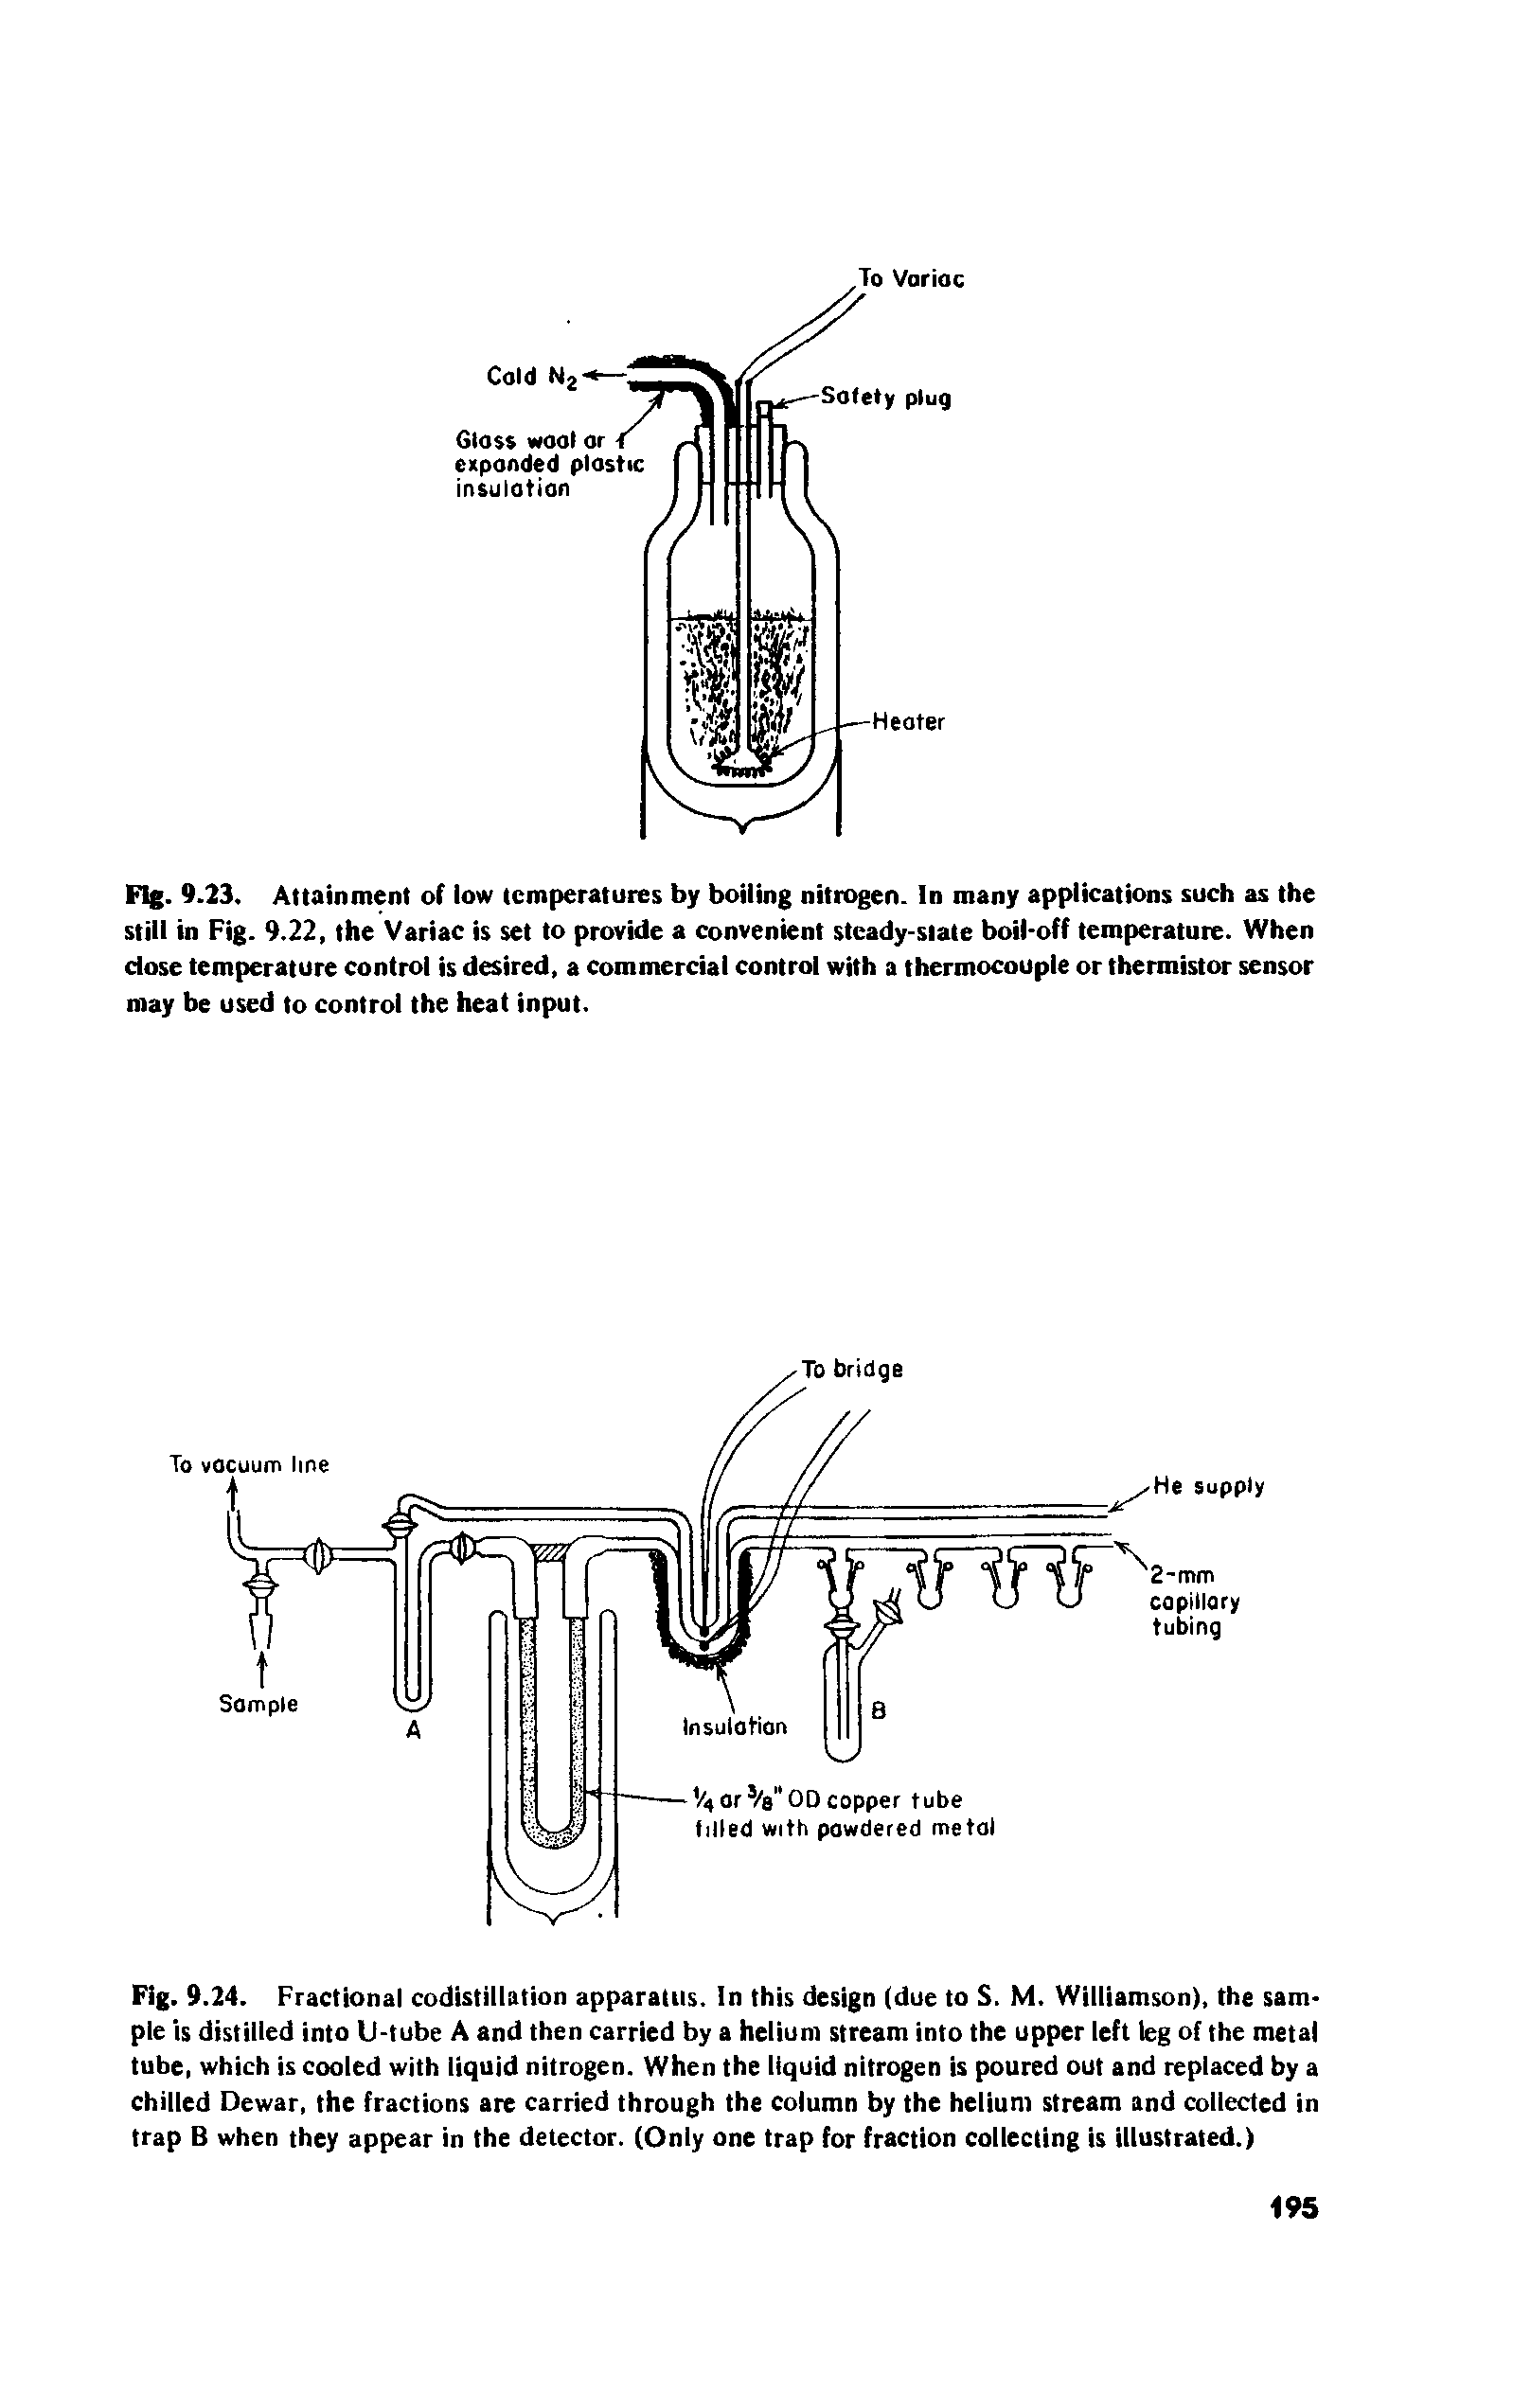 Fig. 9.24. Fractional codistillation apparatus. In this design (due to S. M. Williamson), the sample is distilled into U-tube A and then carried by a helium stream into the upper left leg of the metal tube, which is cooled with liquid nitrogen. When the liquid nitrogen is poured out and replaced by a chilled Dewar, the fractions are carried through the column by the helium stream and collected in trap B when they appear in the detector. (Only one trap for fraction collecting is illustrated.)...